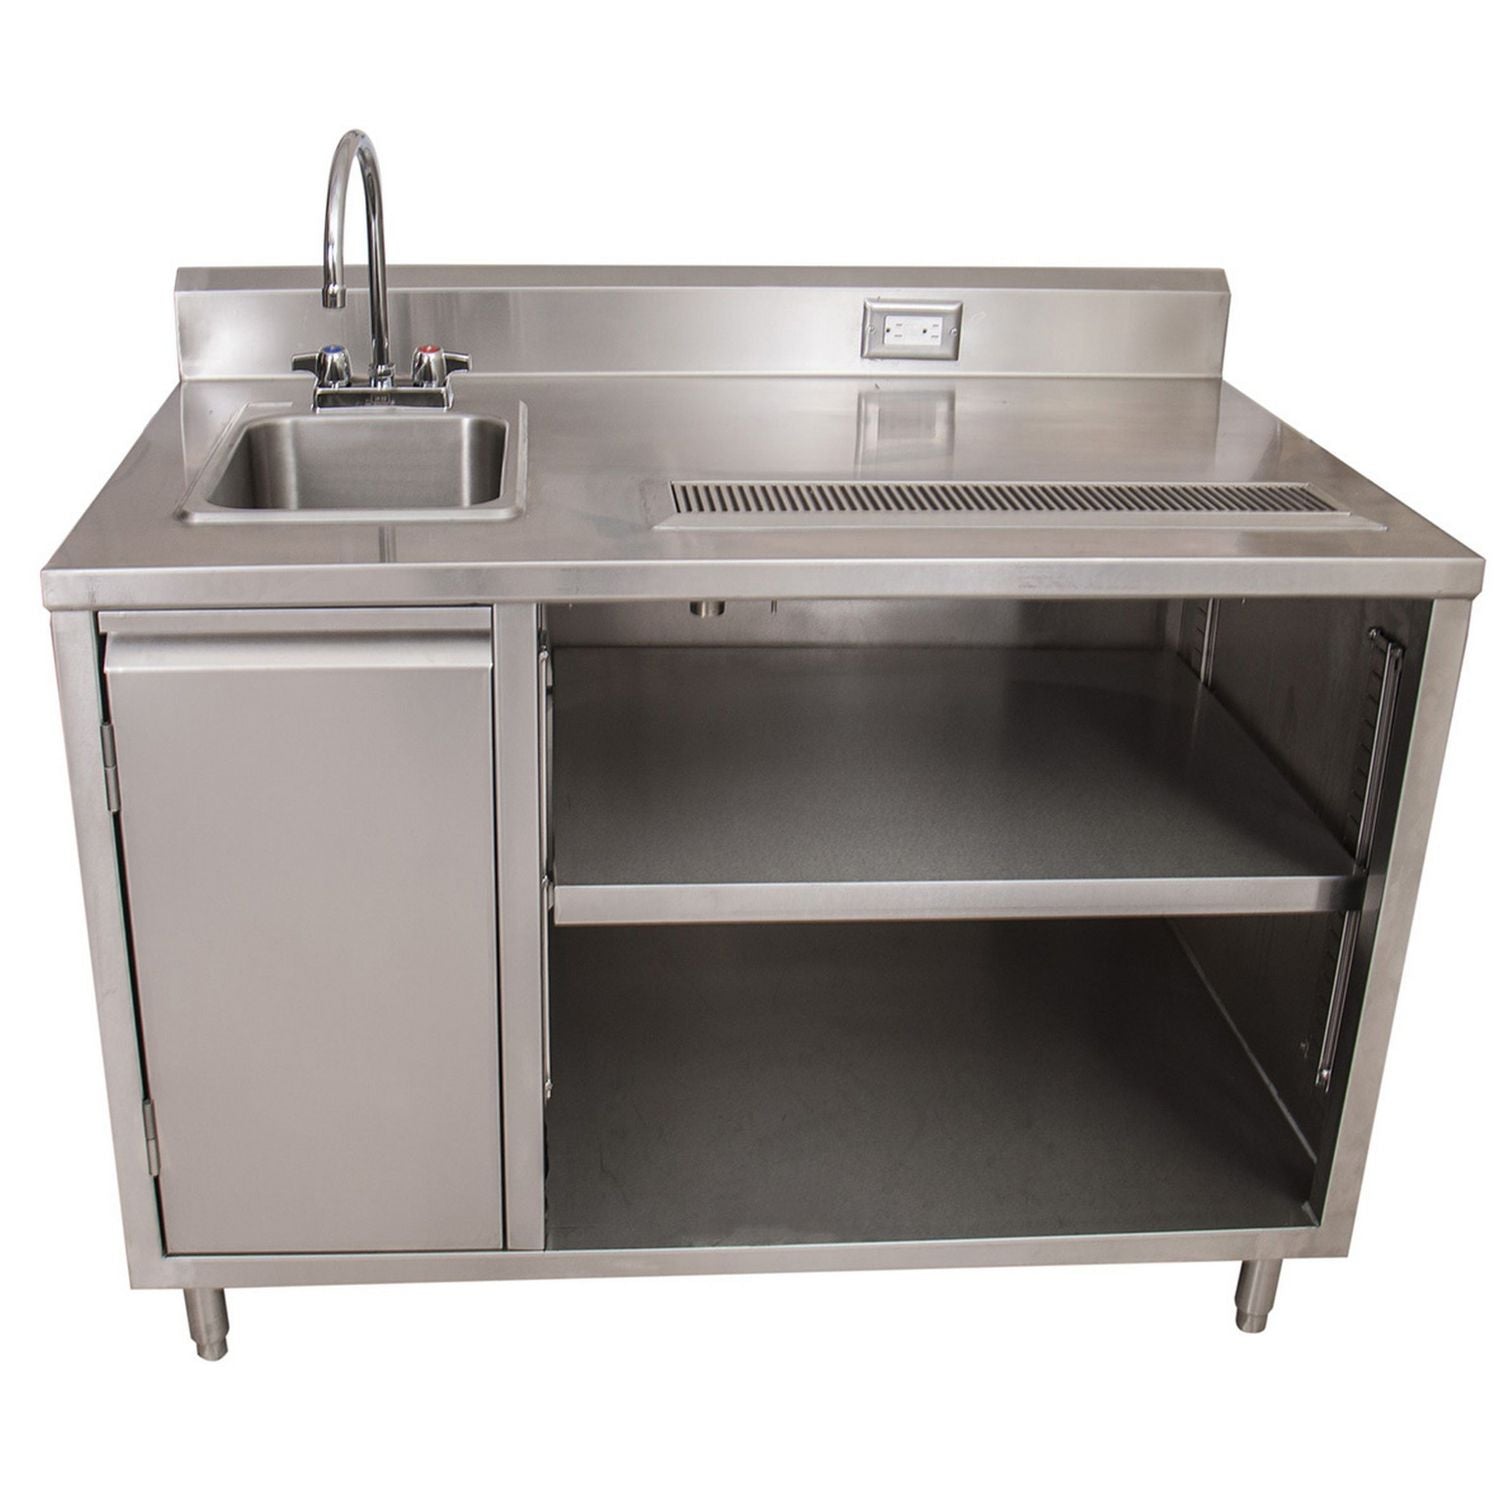 stainless-steel-beverage-table-with-left-sink-rectangular-30-x-72-x-415-silver-ships-in-4-6-business-days_bkebevt3072l - 1